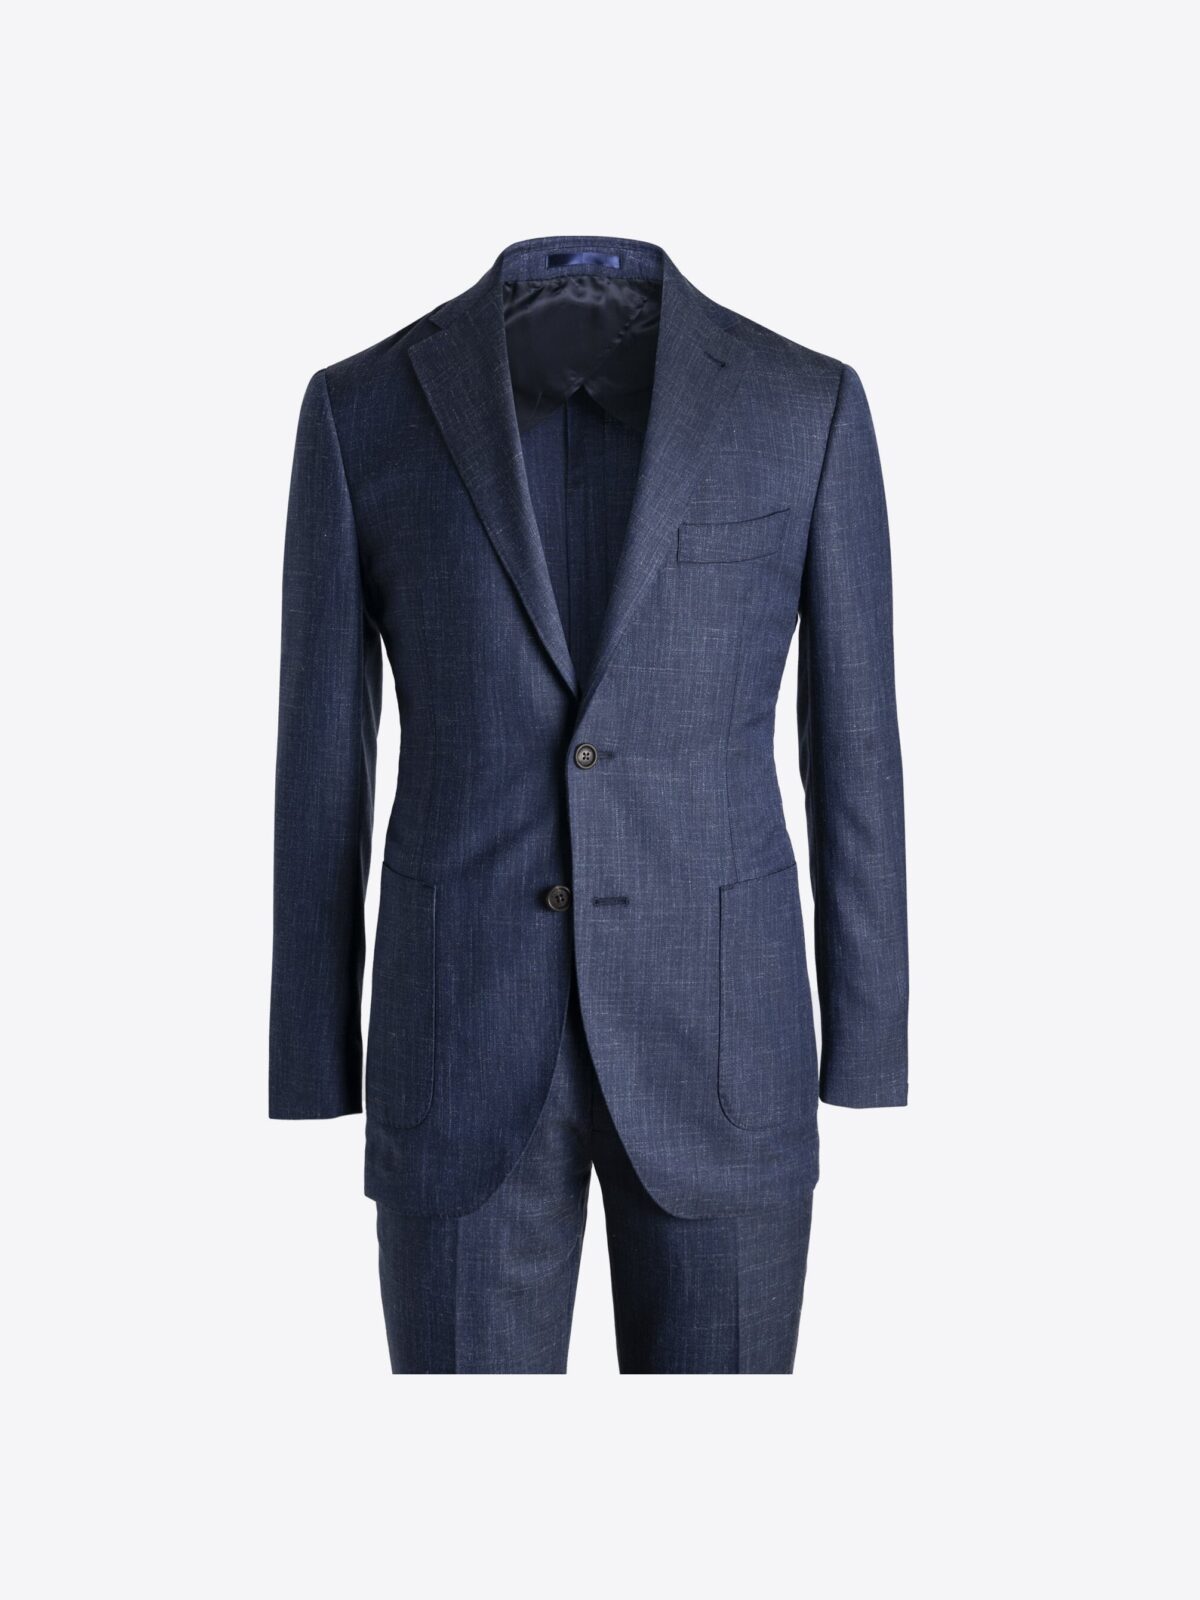 CANALI Double-Breasted Linen and Silk-Blend Suit Jacket for Men